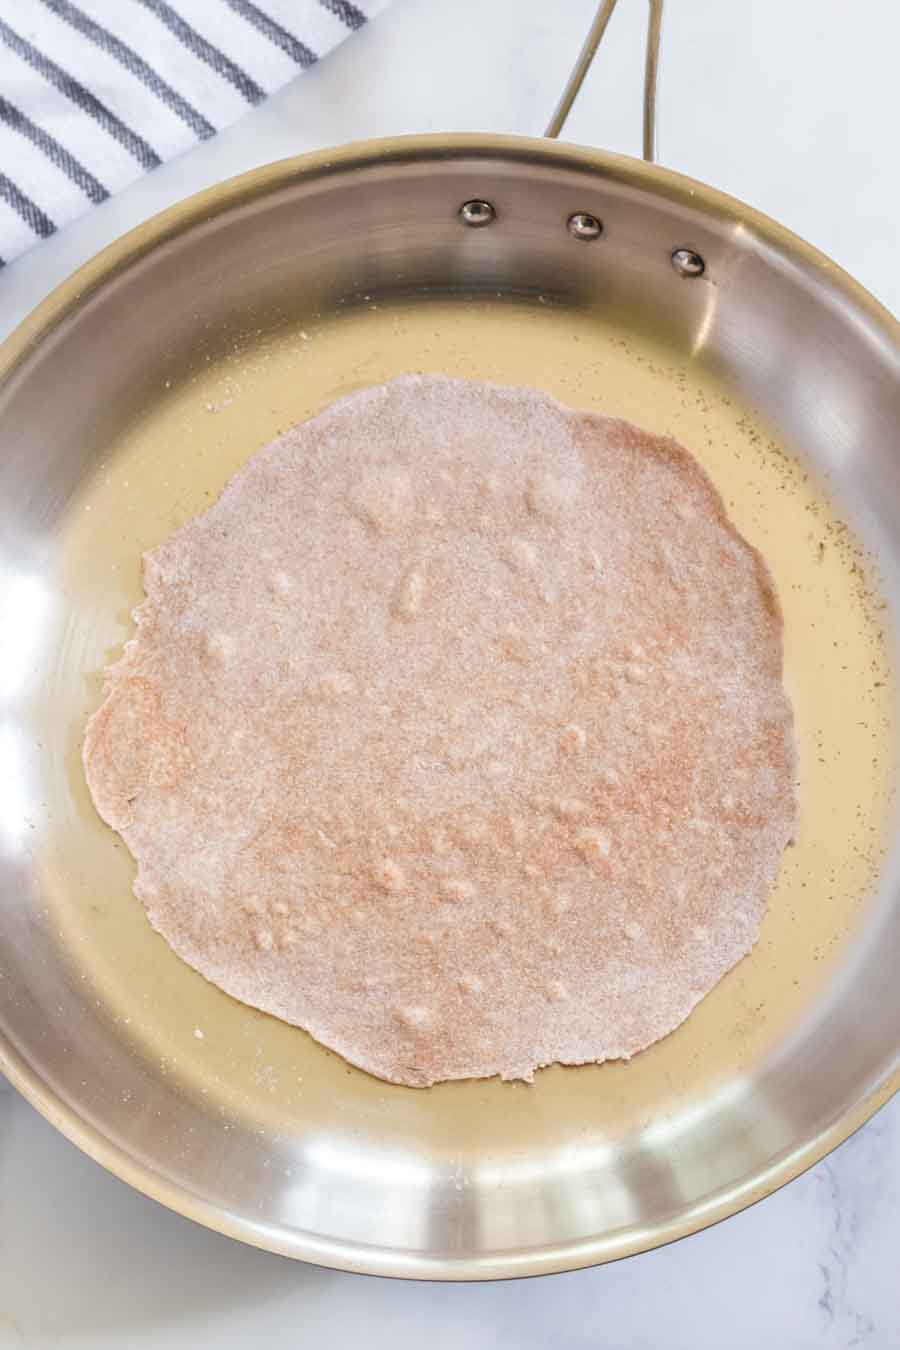 Hearty and healthy, whole wheat tortillas are beyond simple to make and go great with bold flavored wraps, tacos, and gyros!